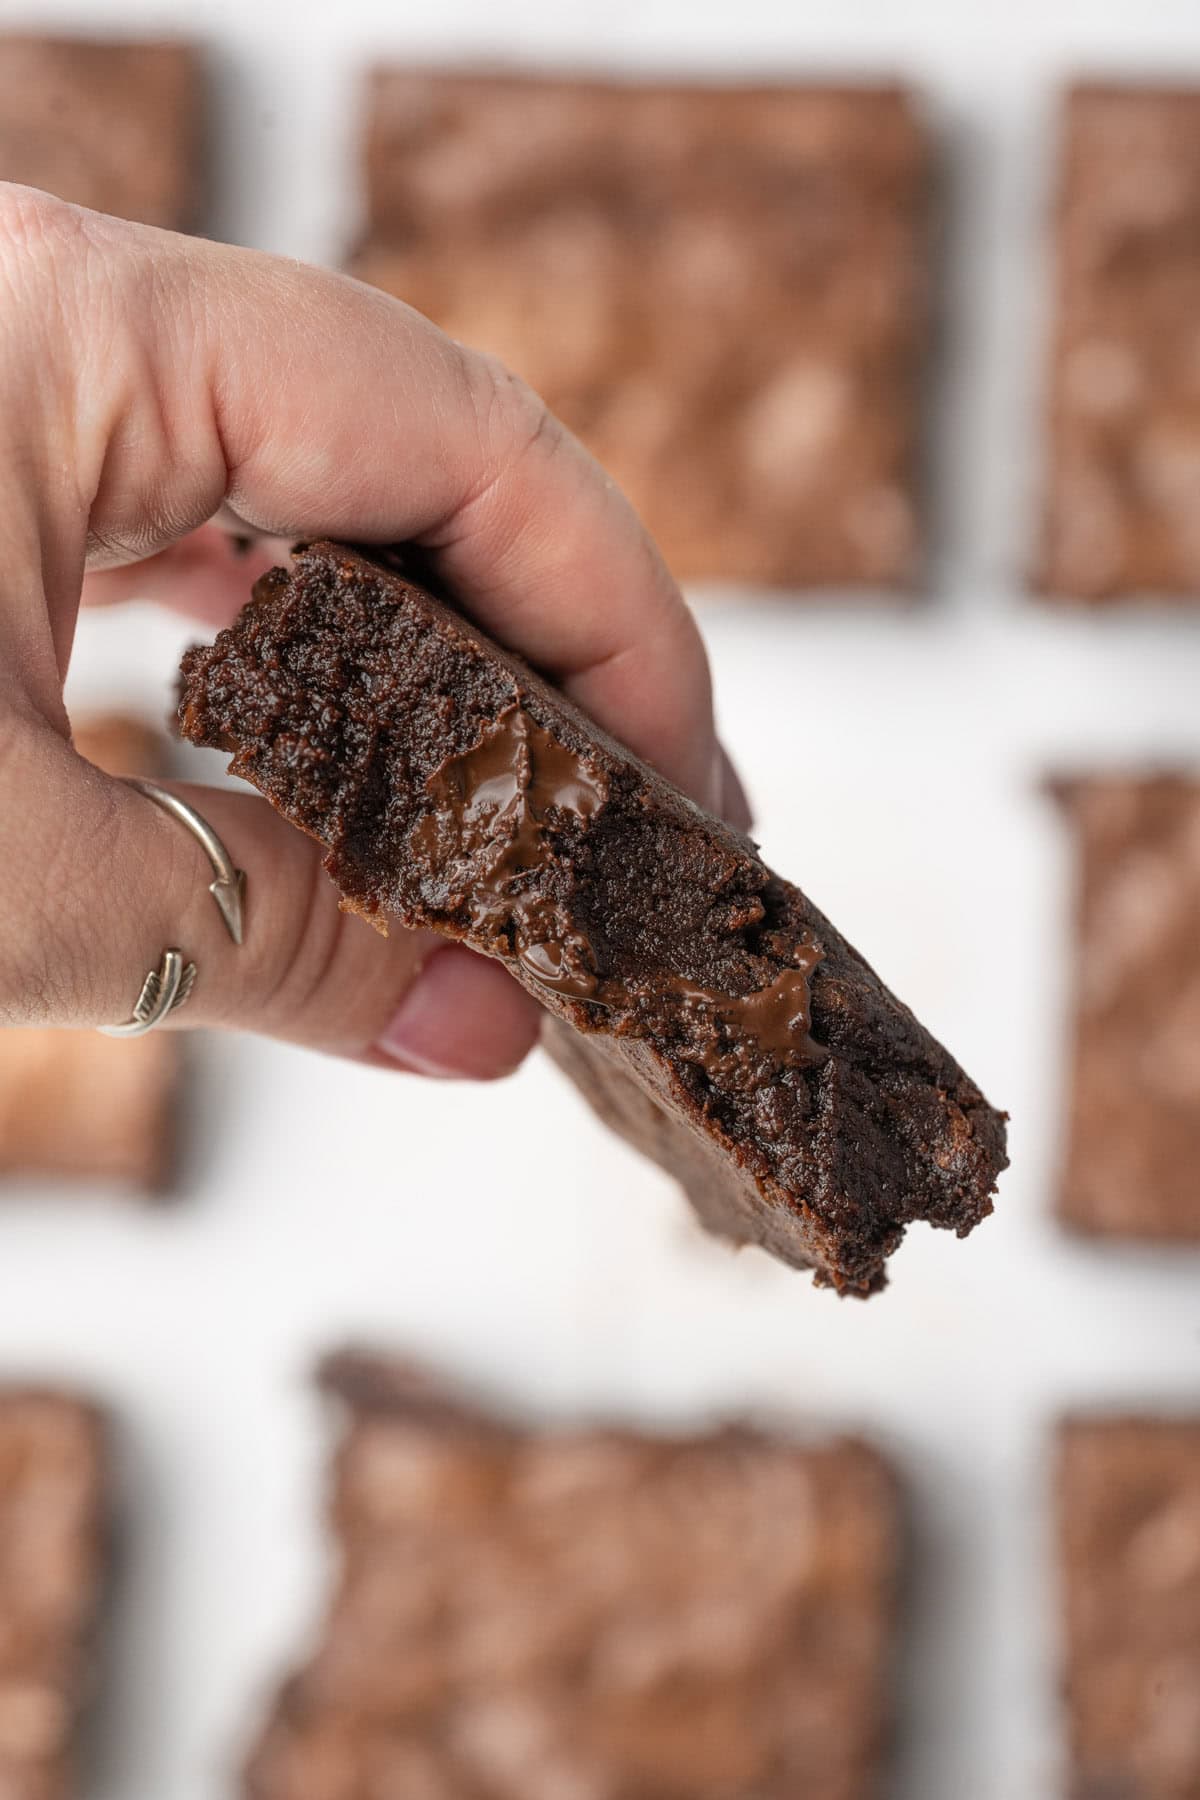 Hand holding a chocolate chip brownie up to the camera.